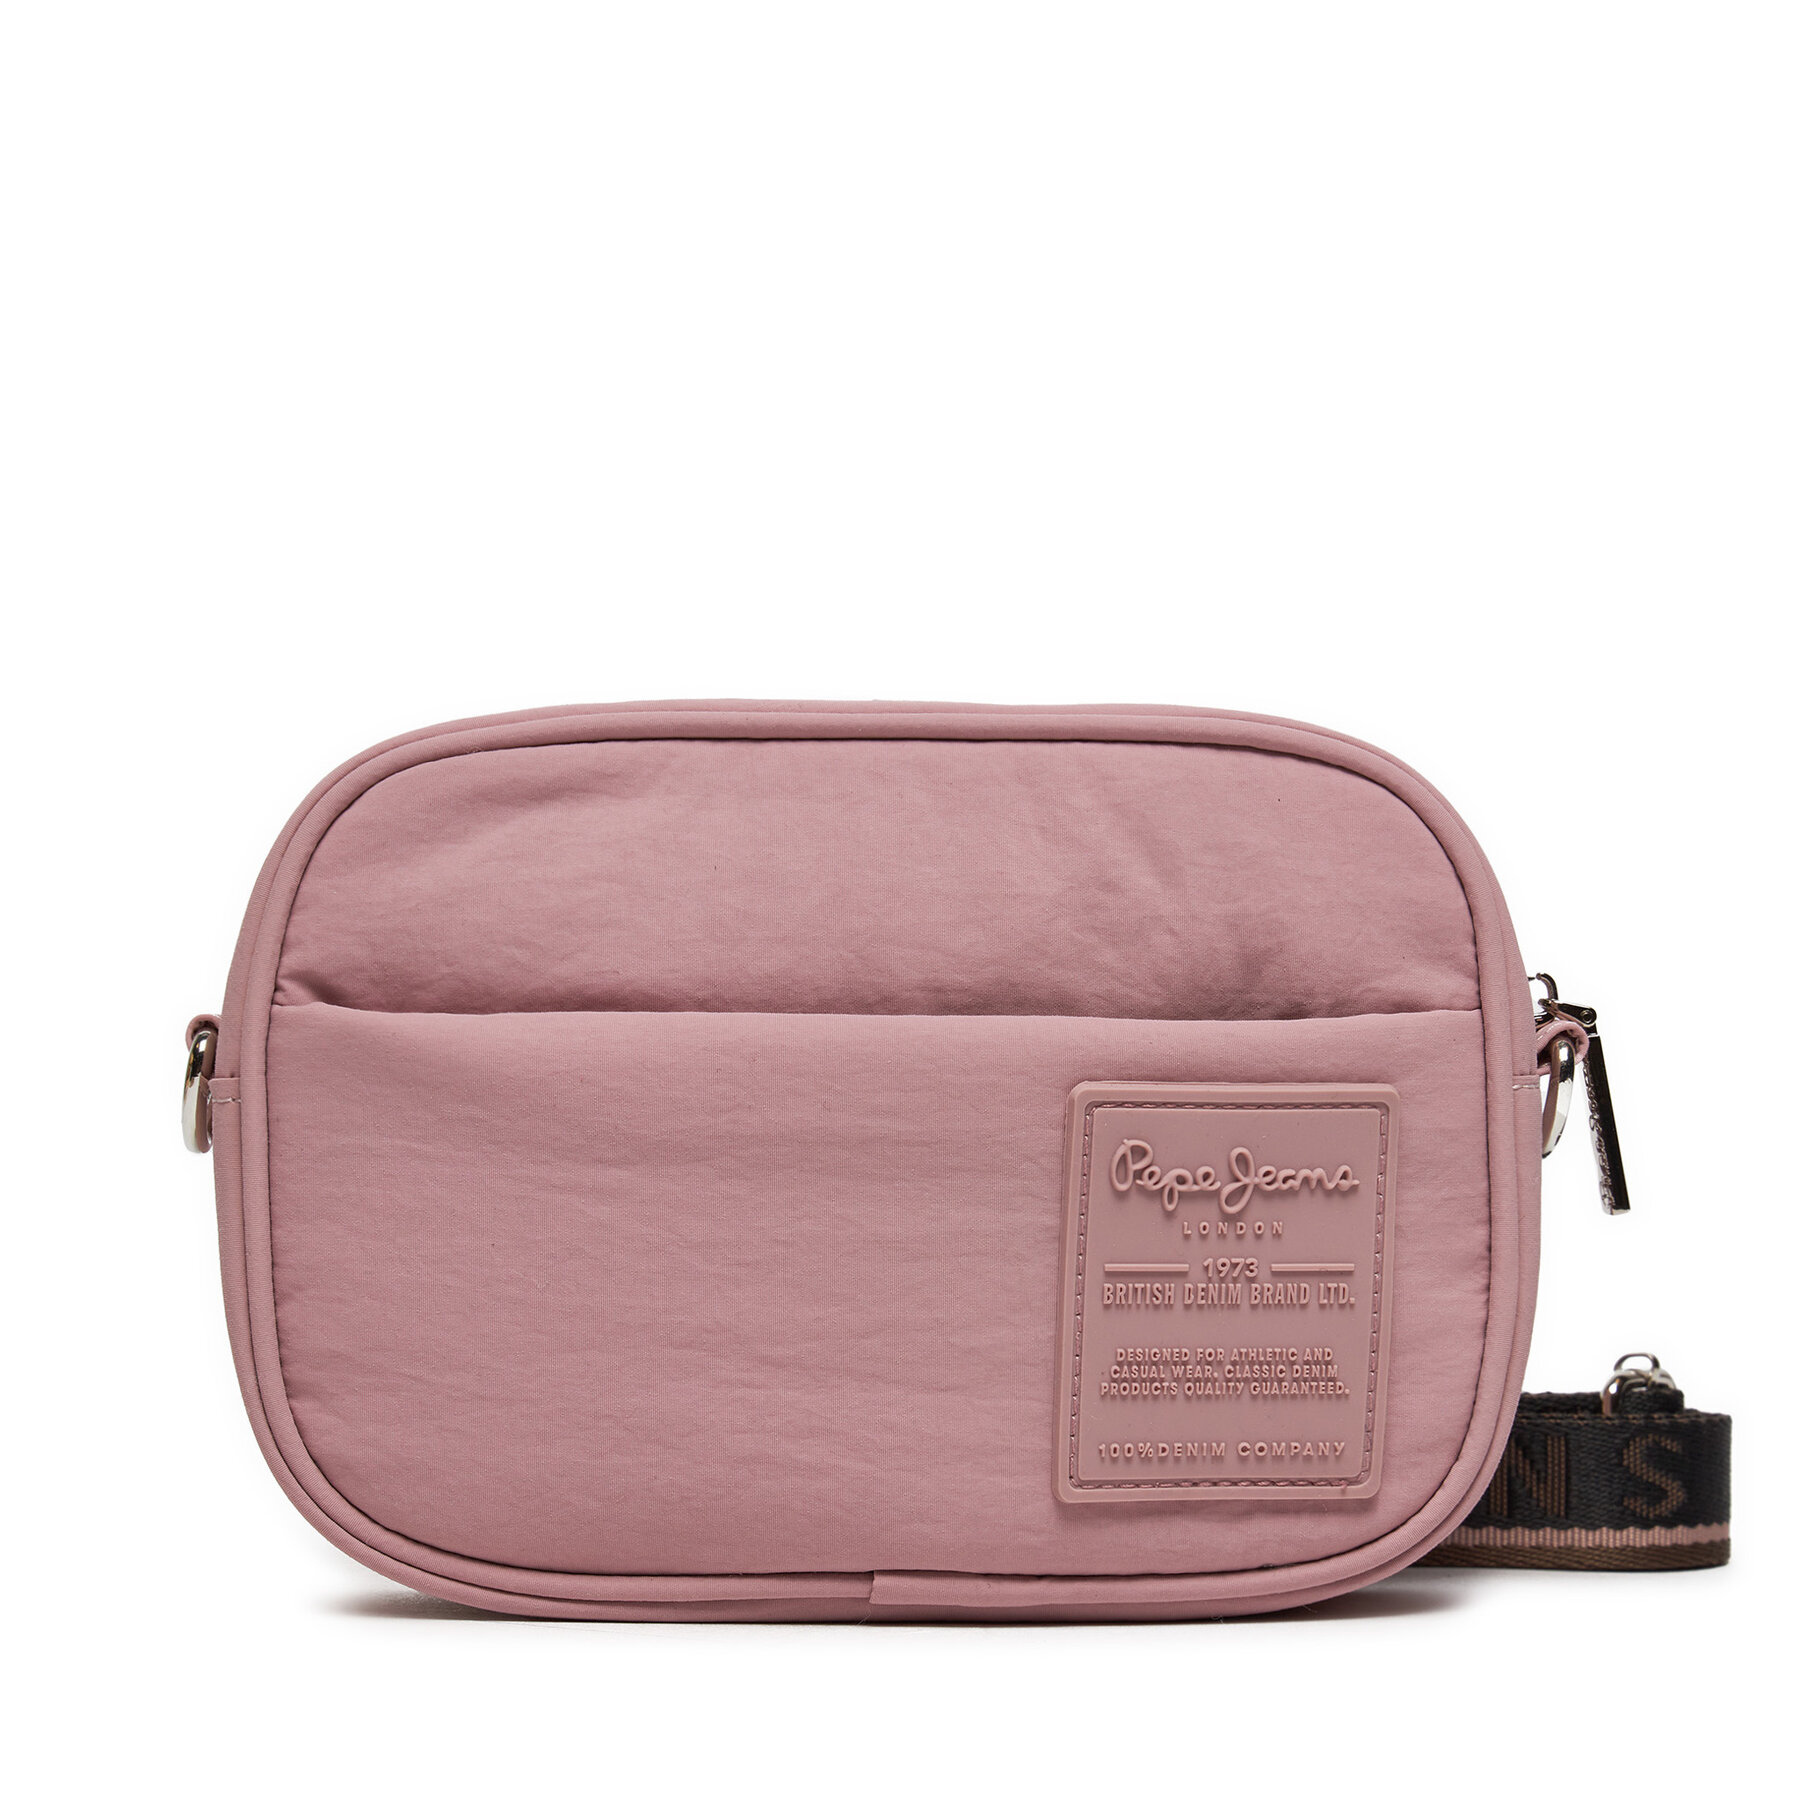 Handtasche Pepe Jeans Briana Marge PL031515 Ash Rose Pink 323 von Pepe Jeans